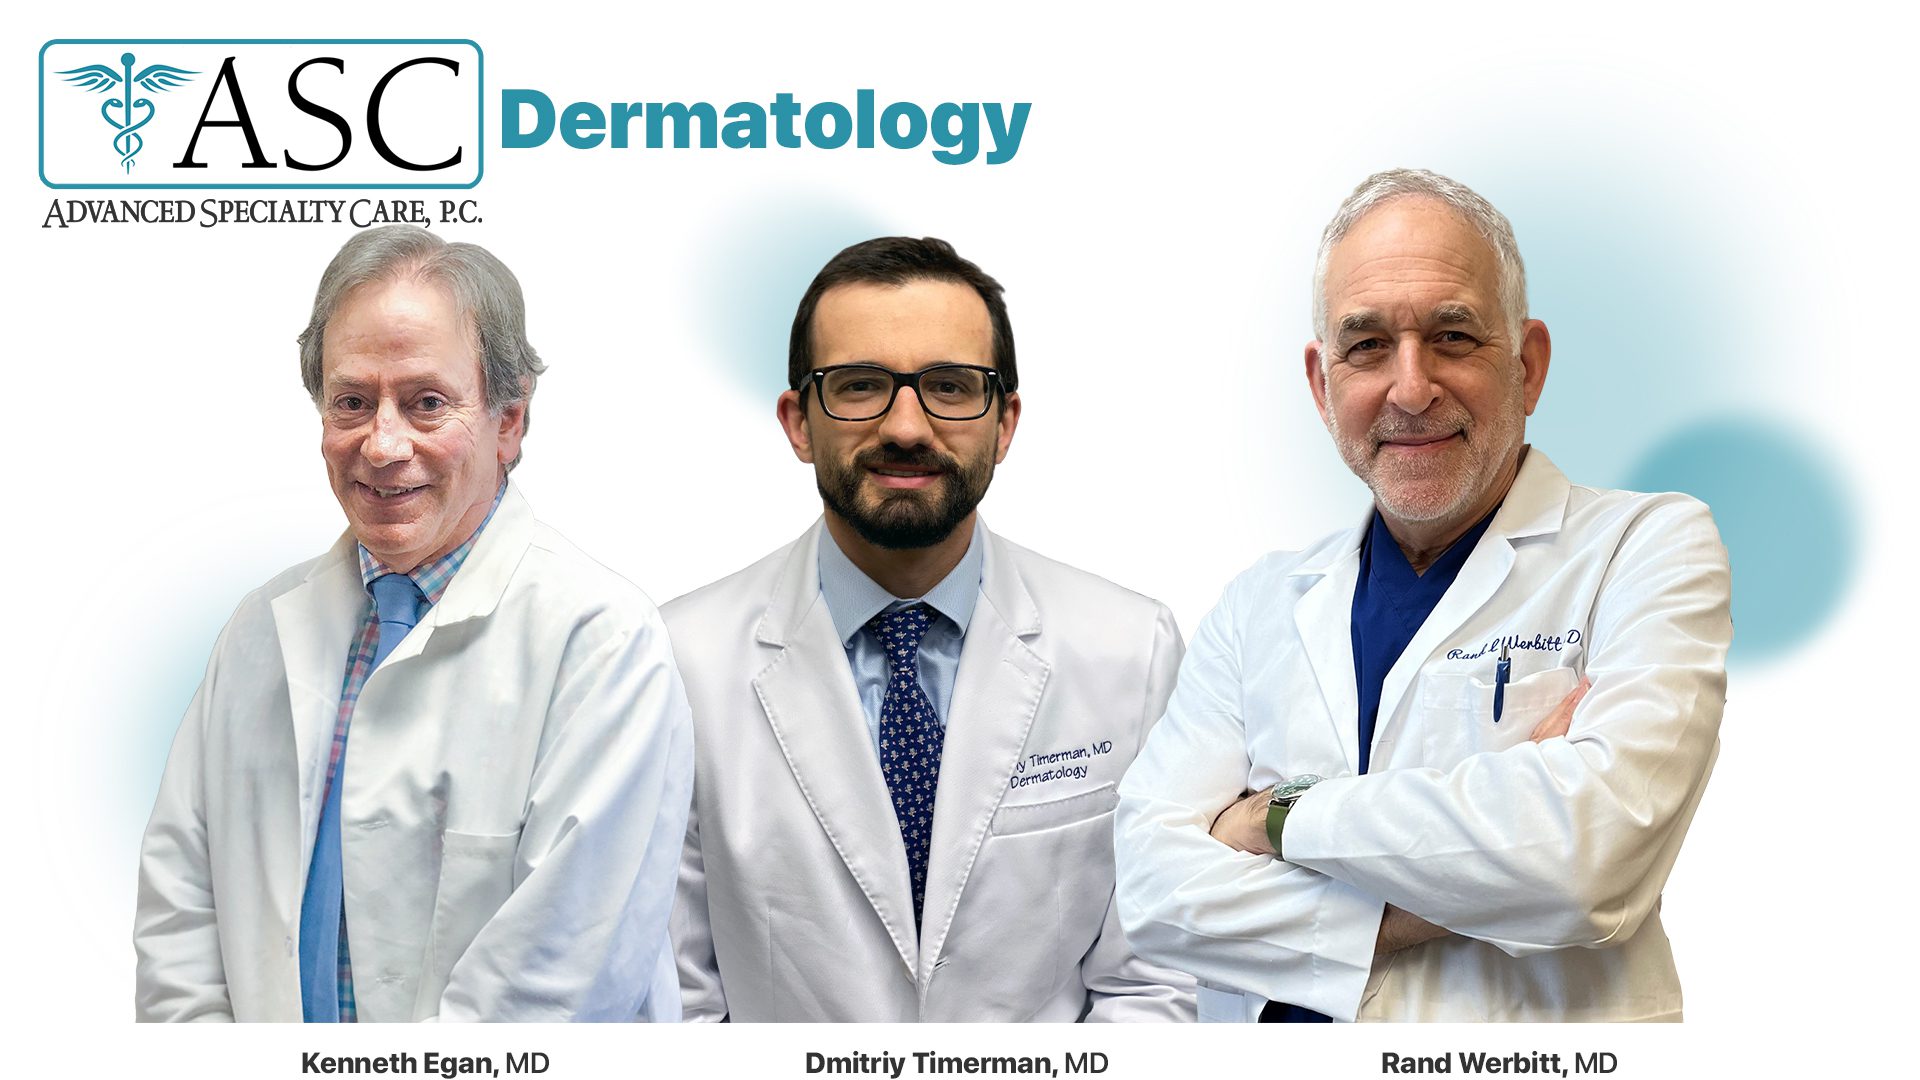 Dermatologists at Advanced Specialty Care--Drs. Kenneth Egan, Dmitriy Timerman, and Rand Werbitt--with offices located across Fairfield County, including Danbury, New Milford, Ridgefield, Norwalk & Stamford, CT.